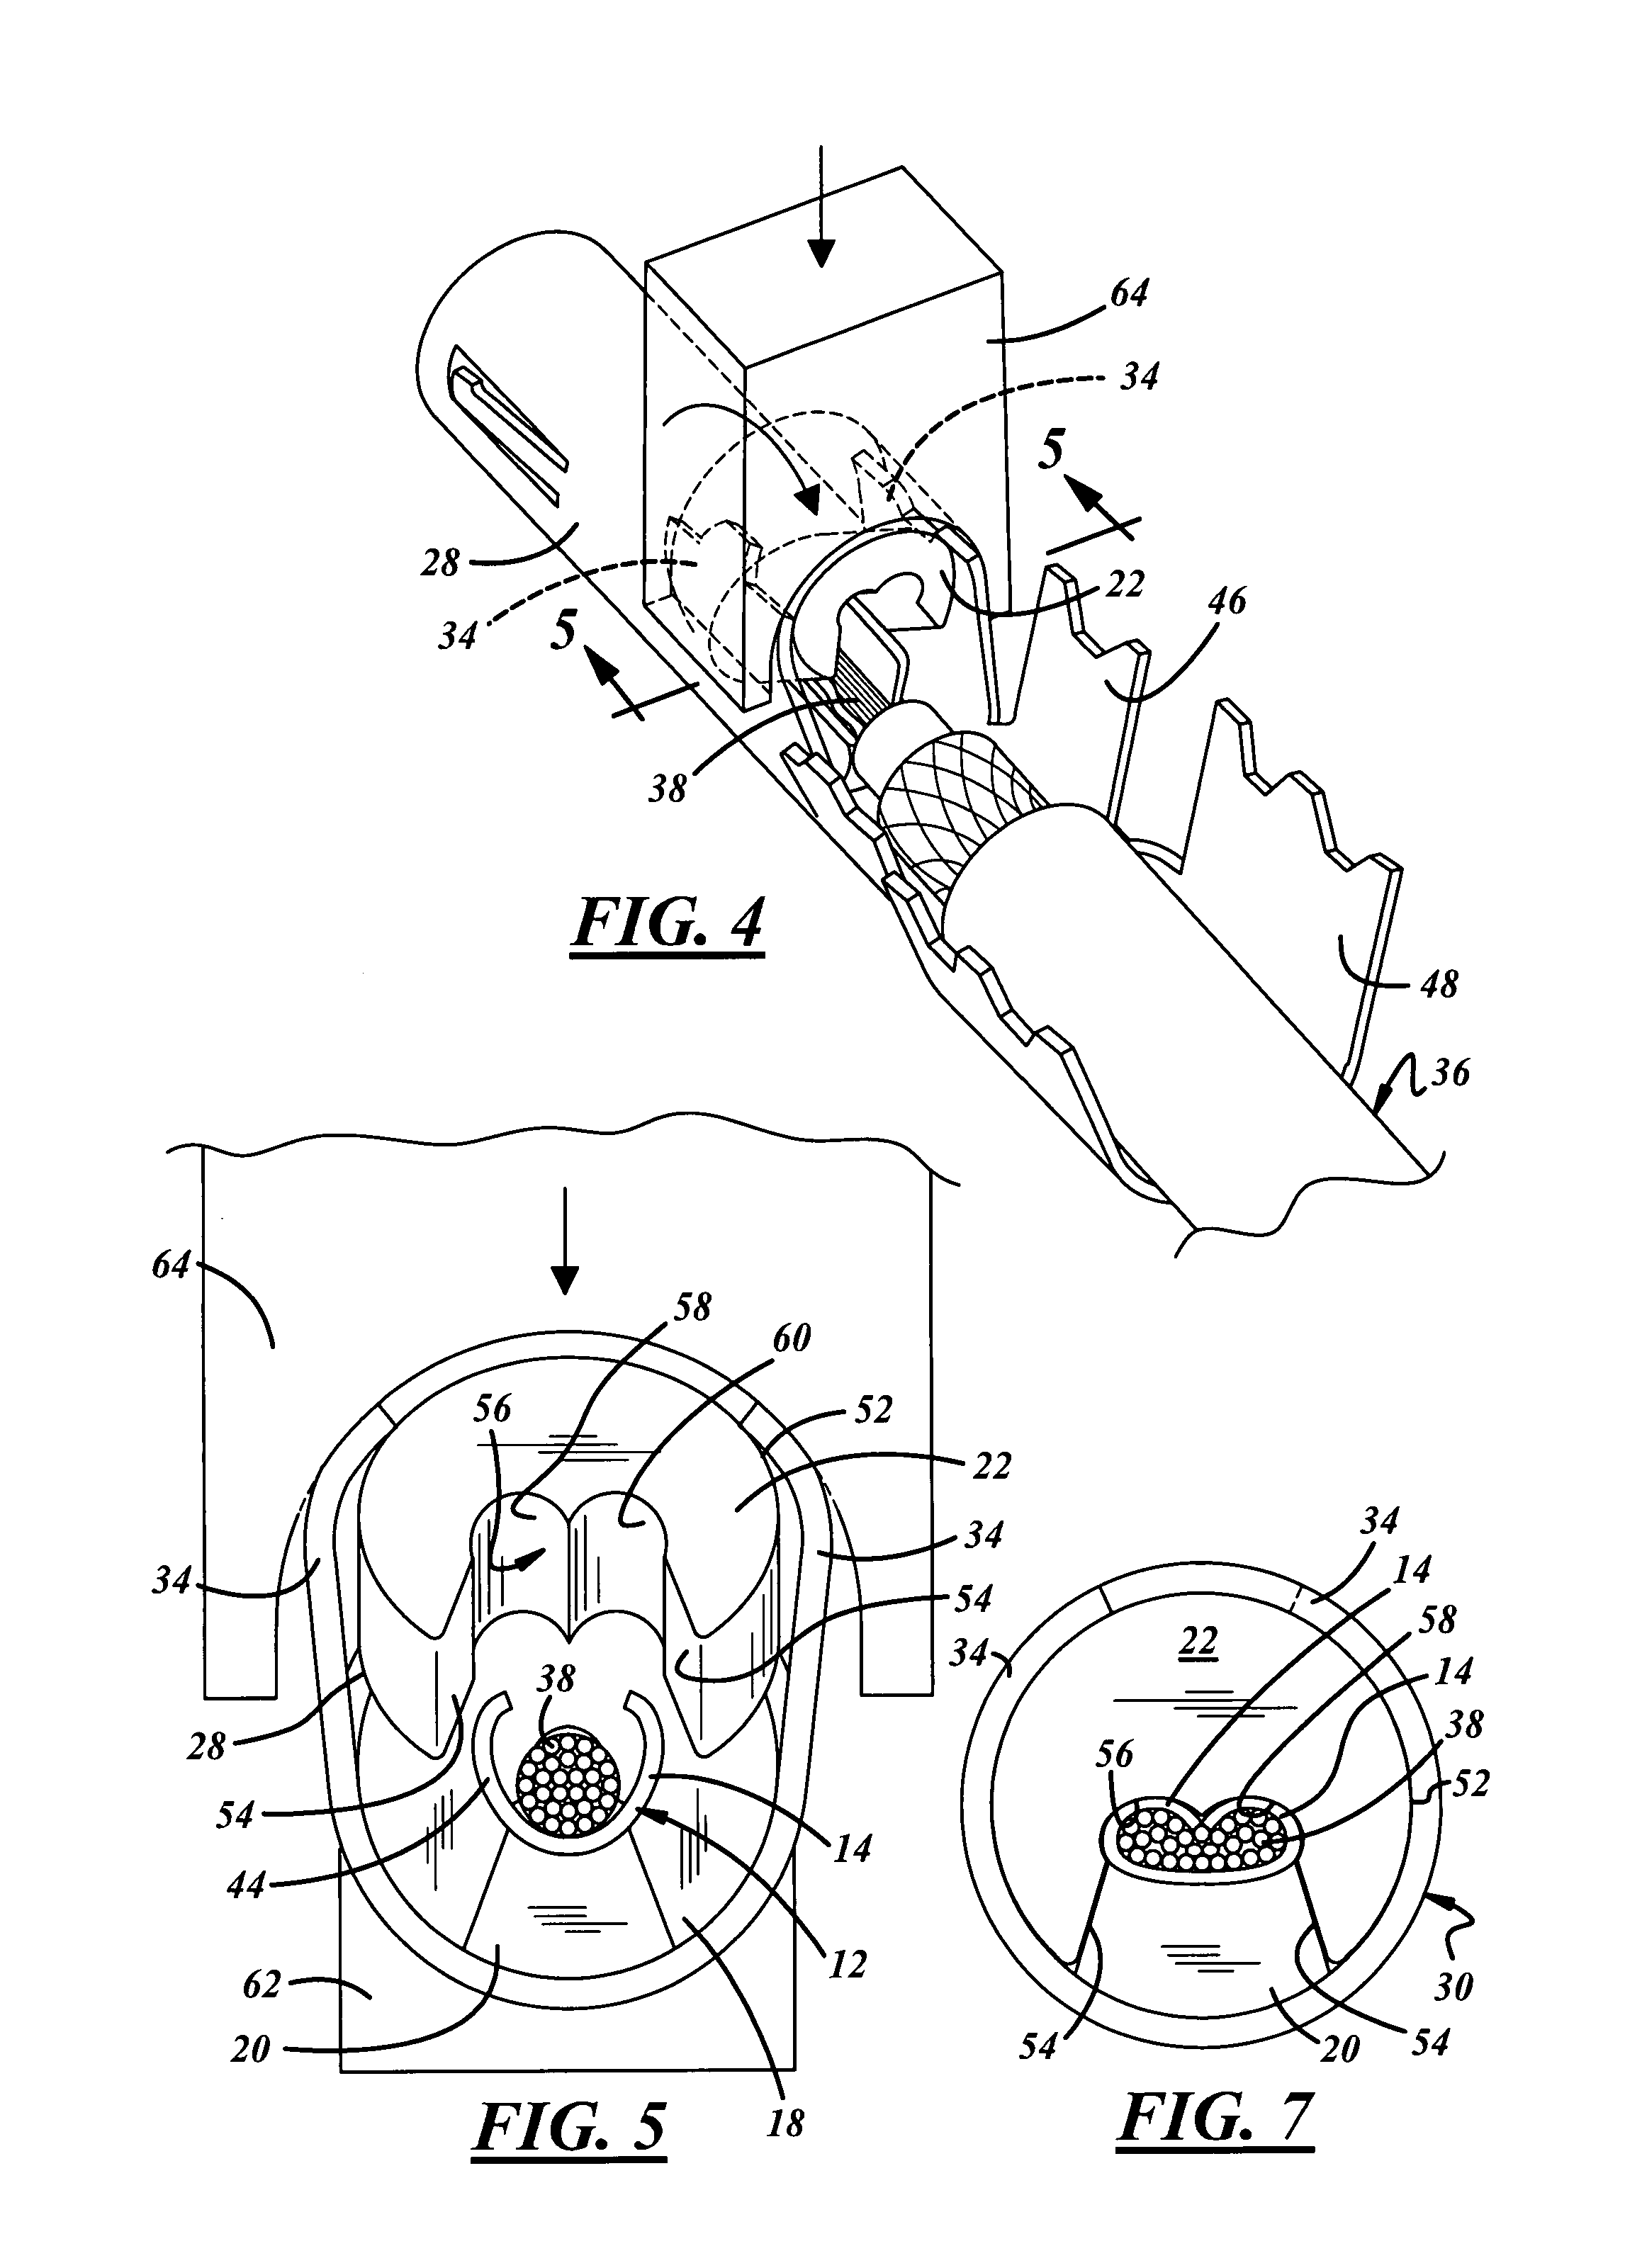 Shielded electric connector and cable assembly and method for making same